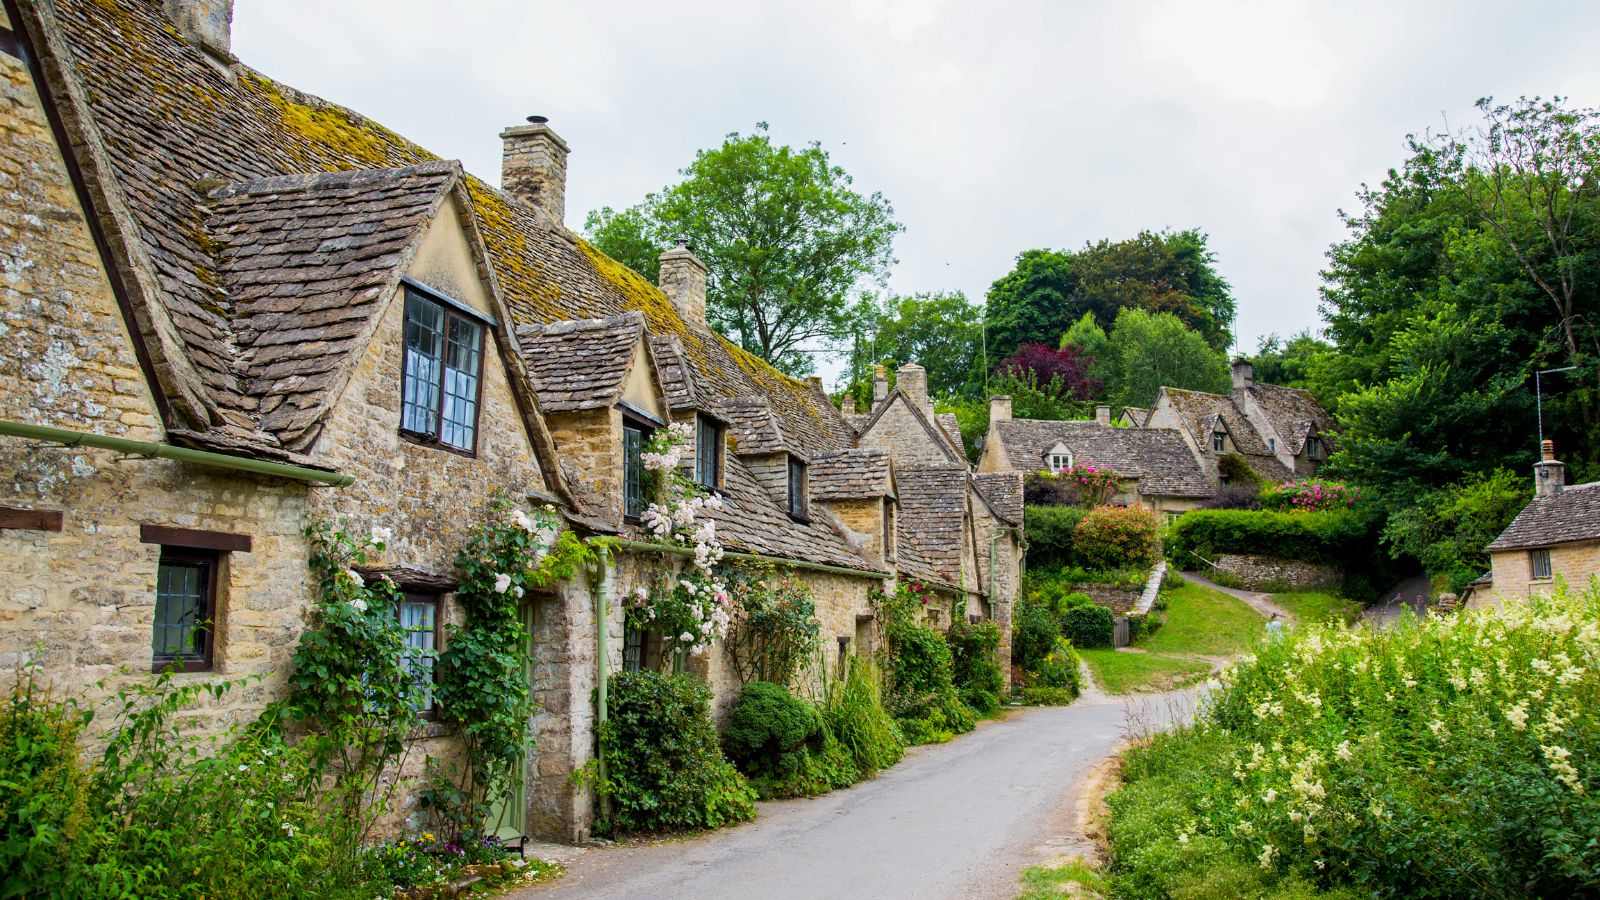 Cottages in a quiet countryside village in England